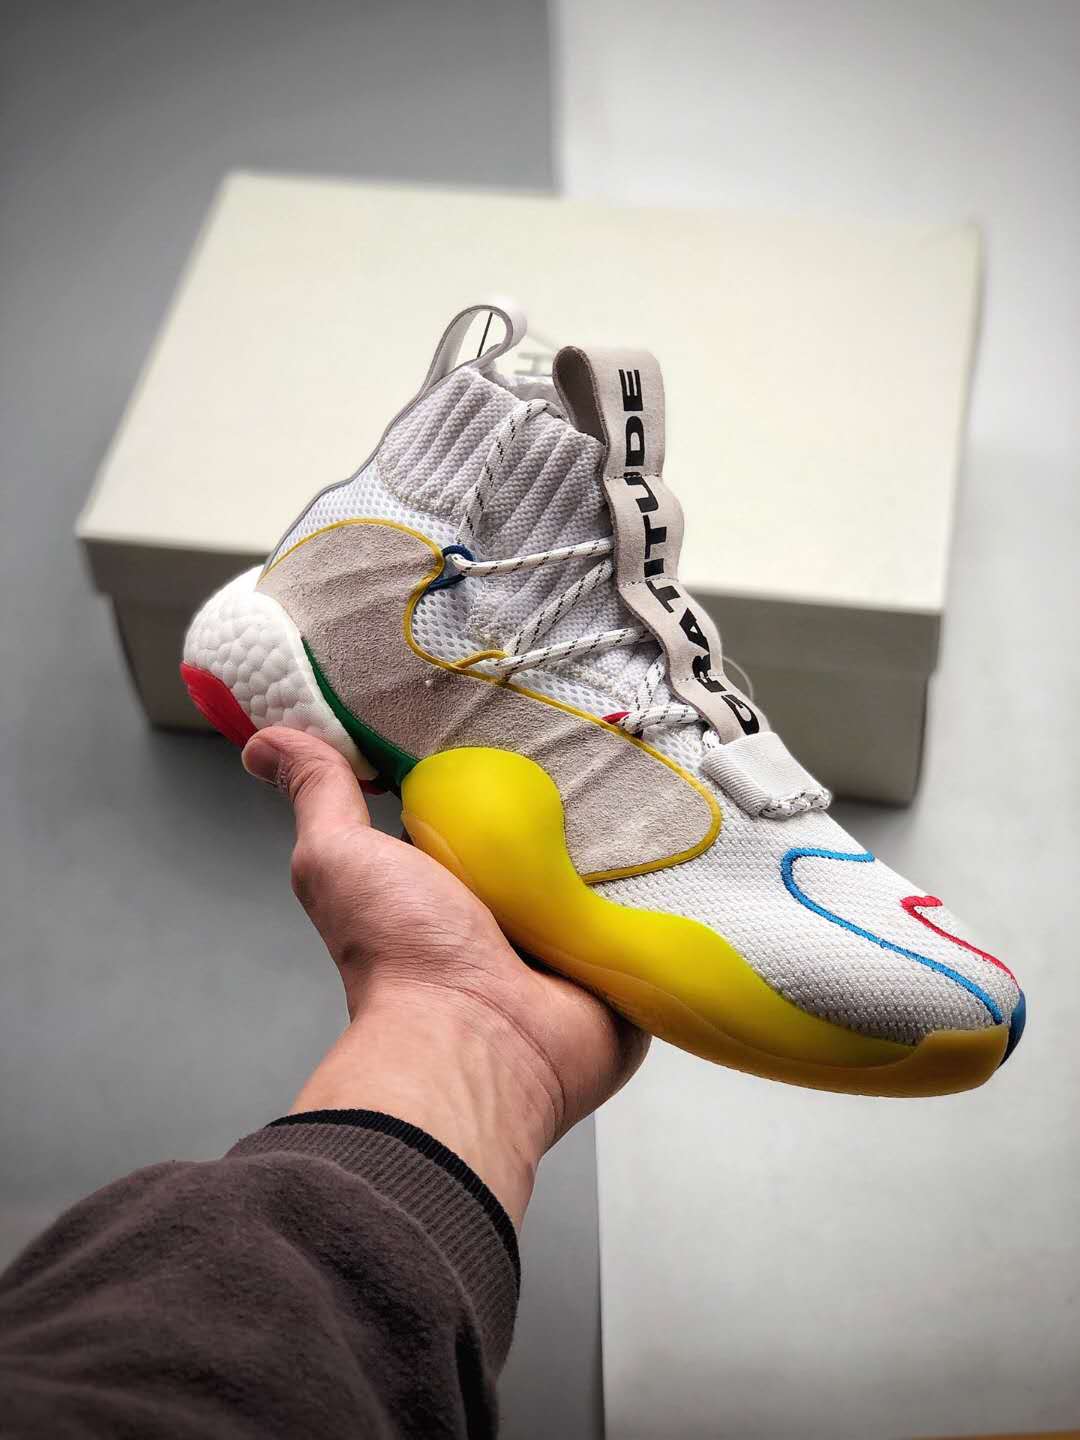 Adidas Crazy BYW LVL X Pharrell Alternate White EF3500 - Limited Edition Release